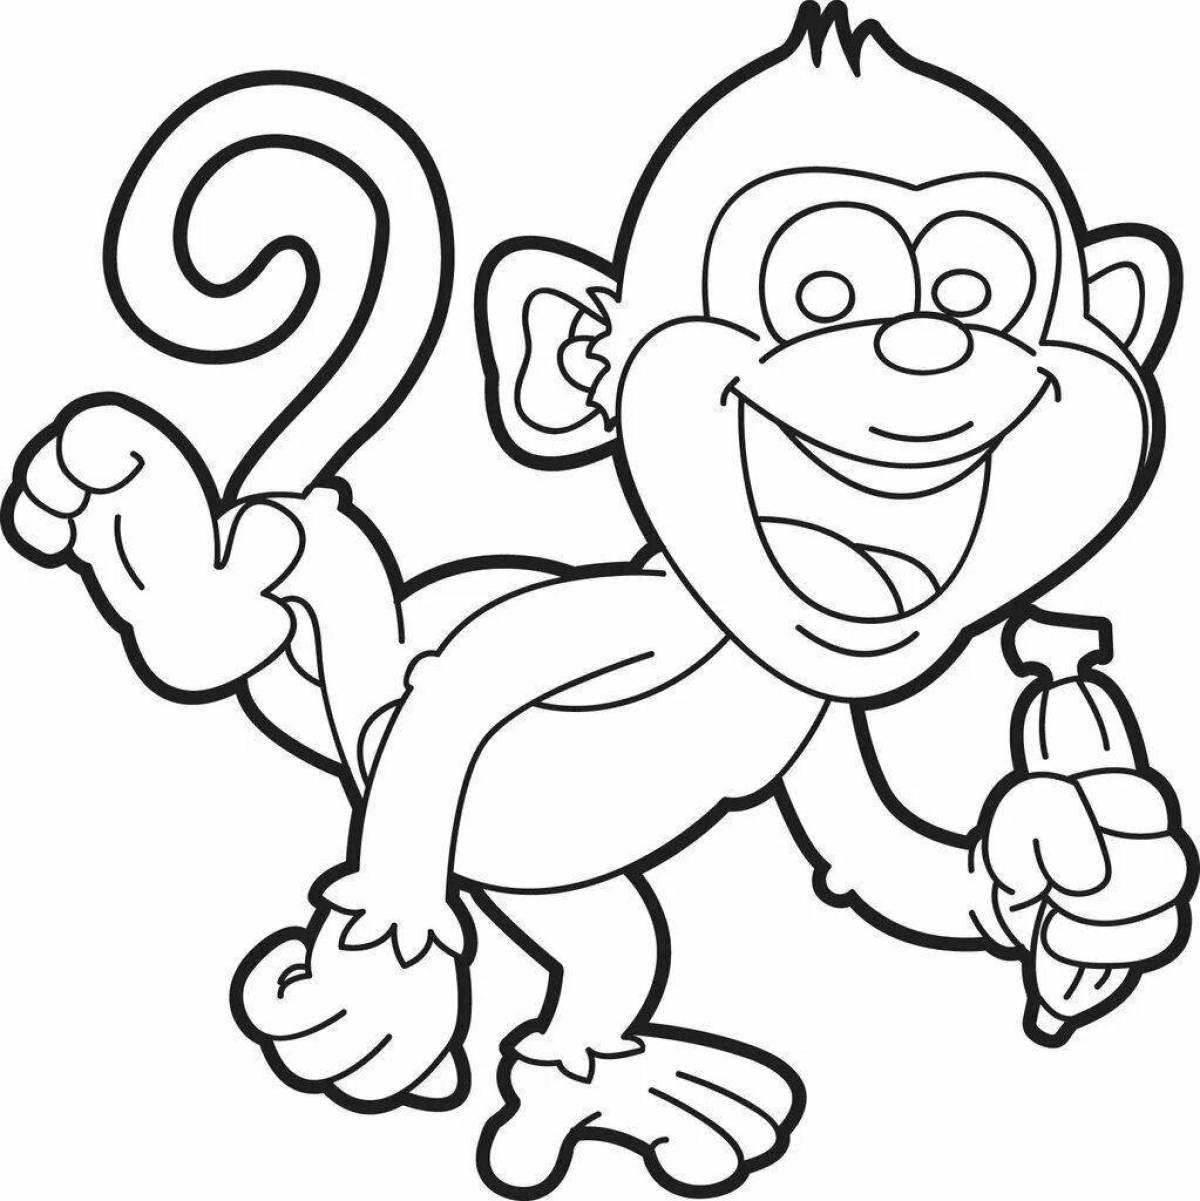 Colorful monkey coloring page for kids